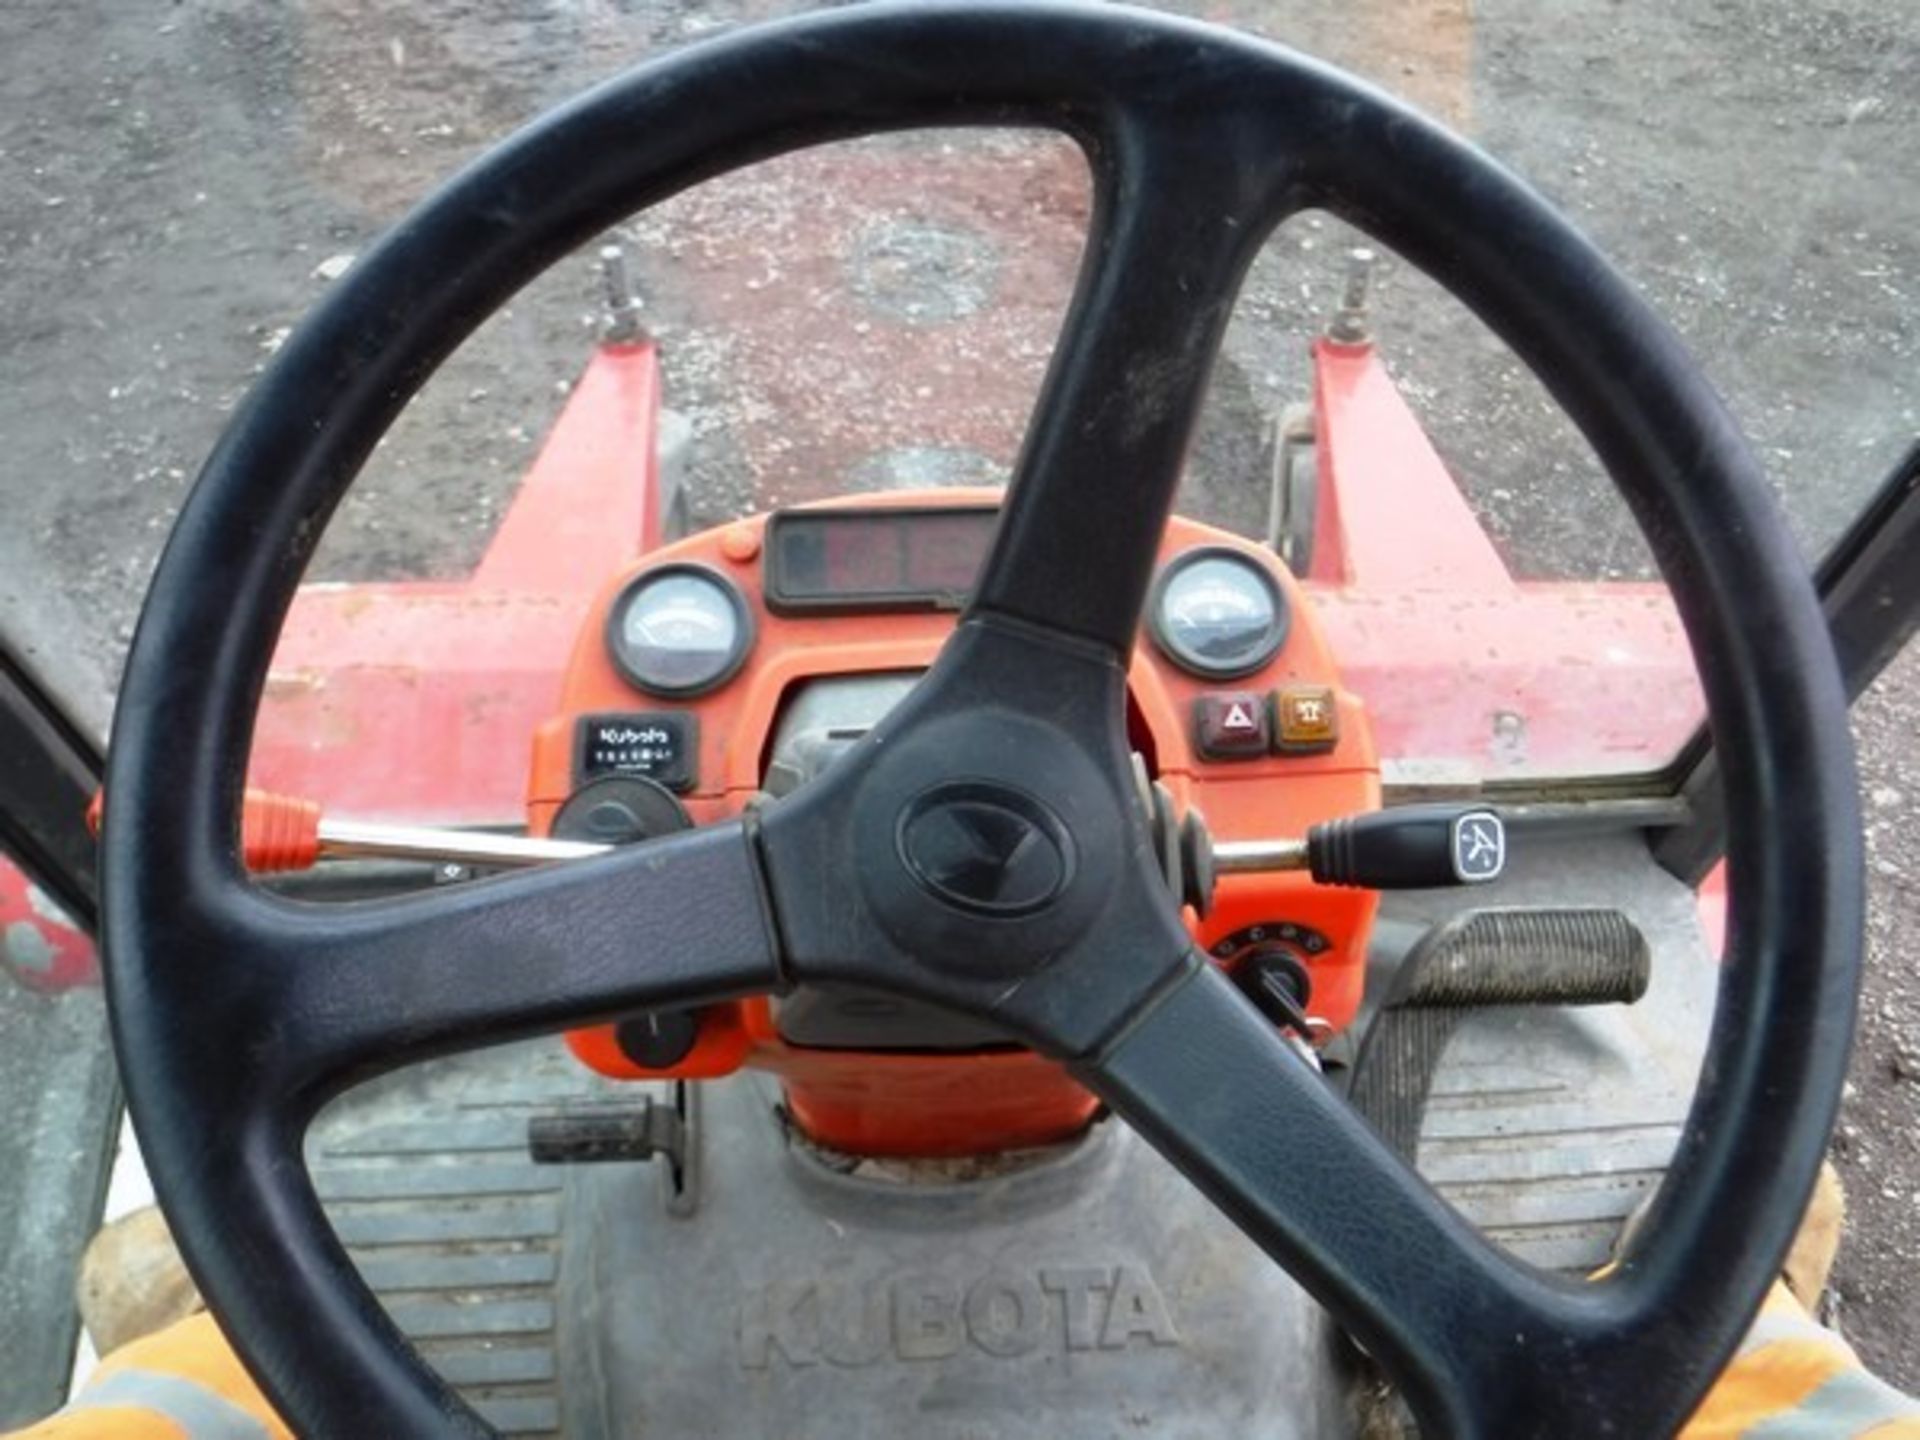 2012 KUBOTA 3680FC. Reg No SP12 AHL c/w flaildeck 155 out front mower. 1545hrs (not verified). This - Image 3 of 12